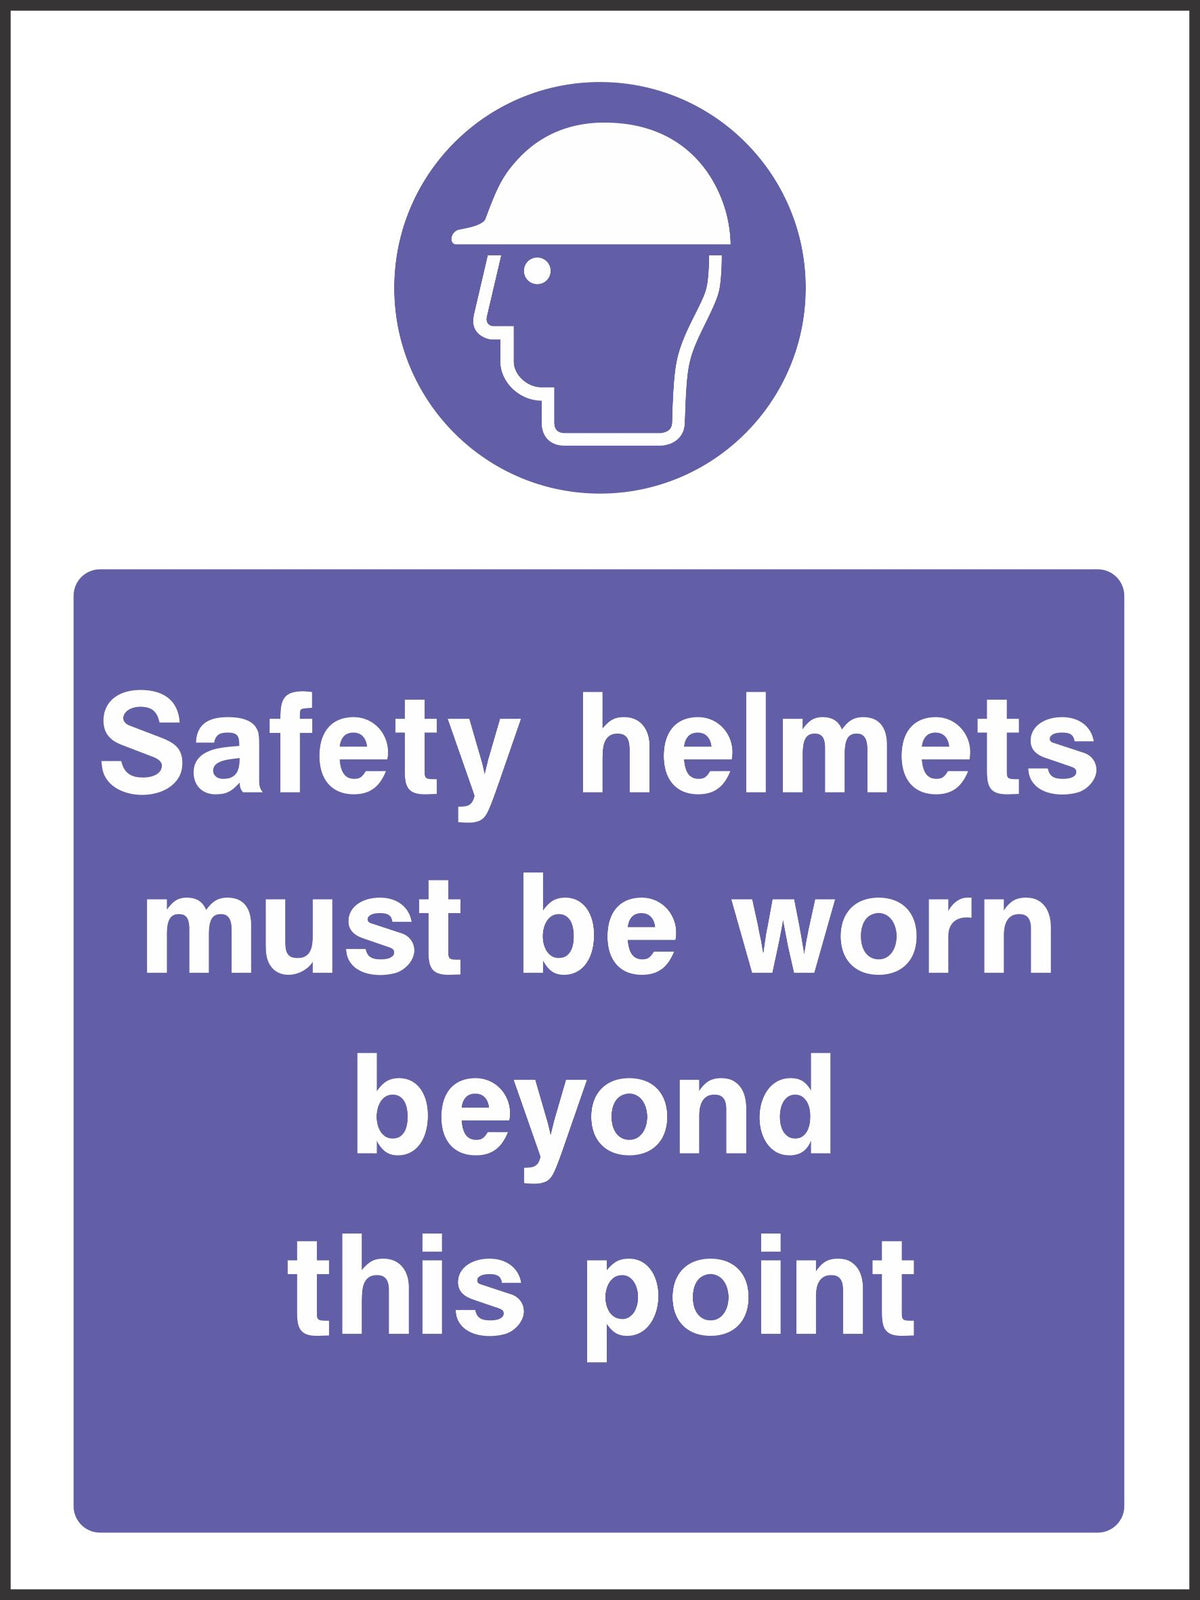 safety helmets must be worn beyond this point sign